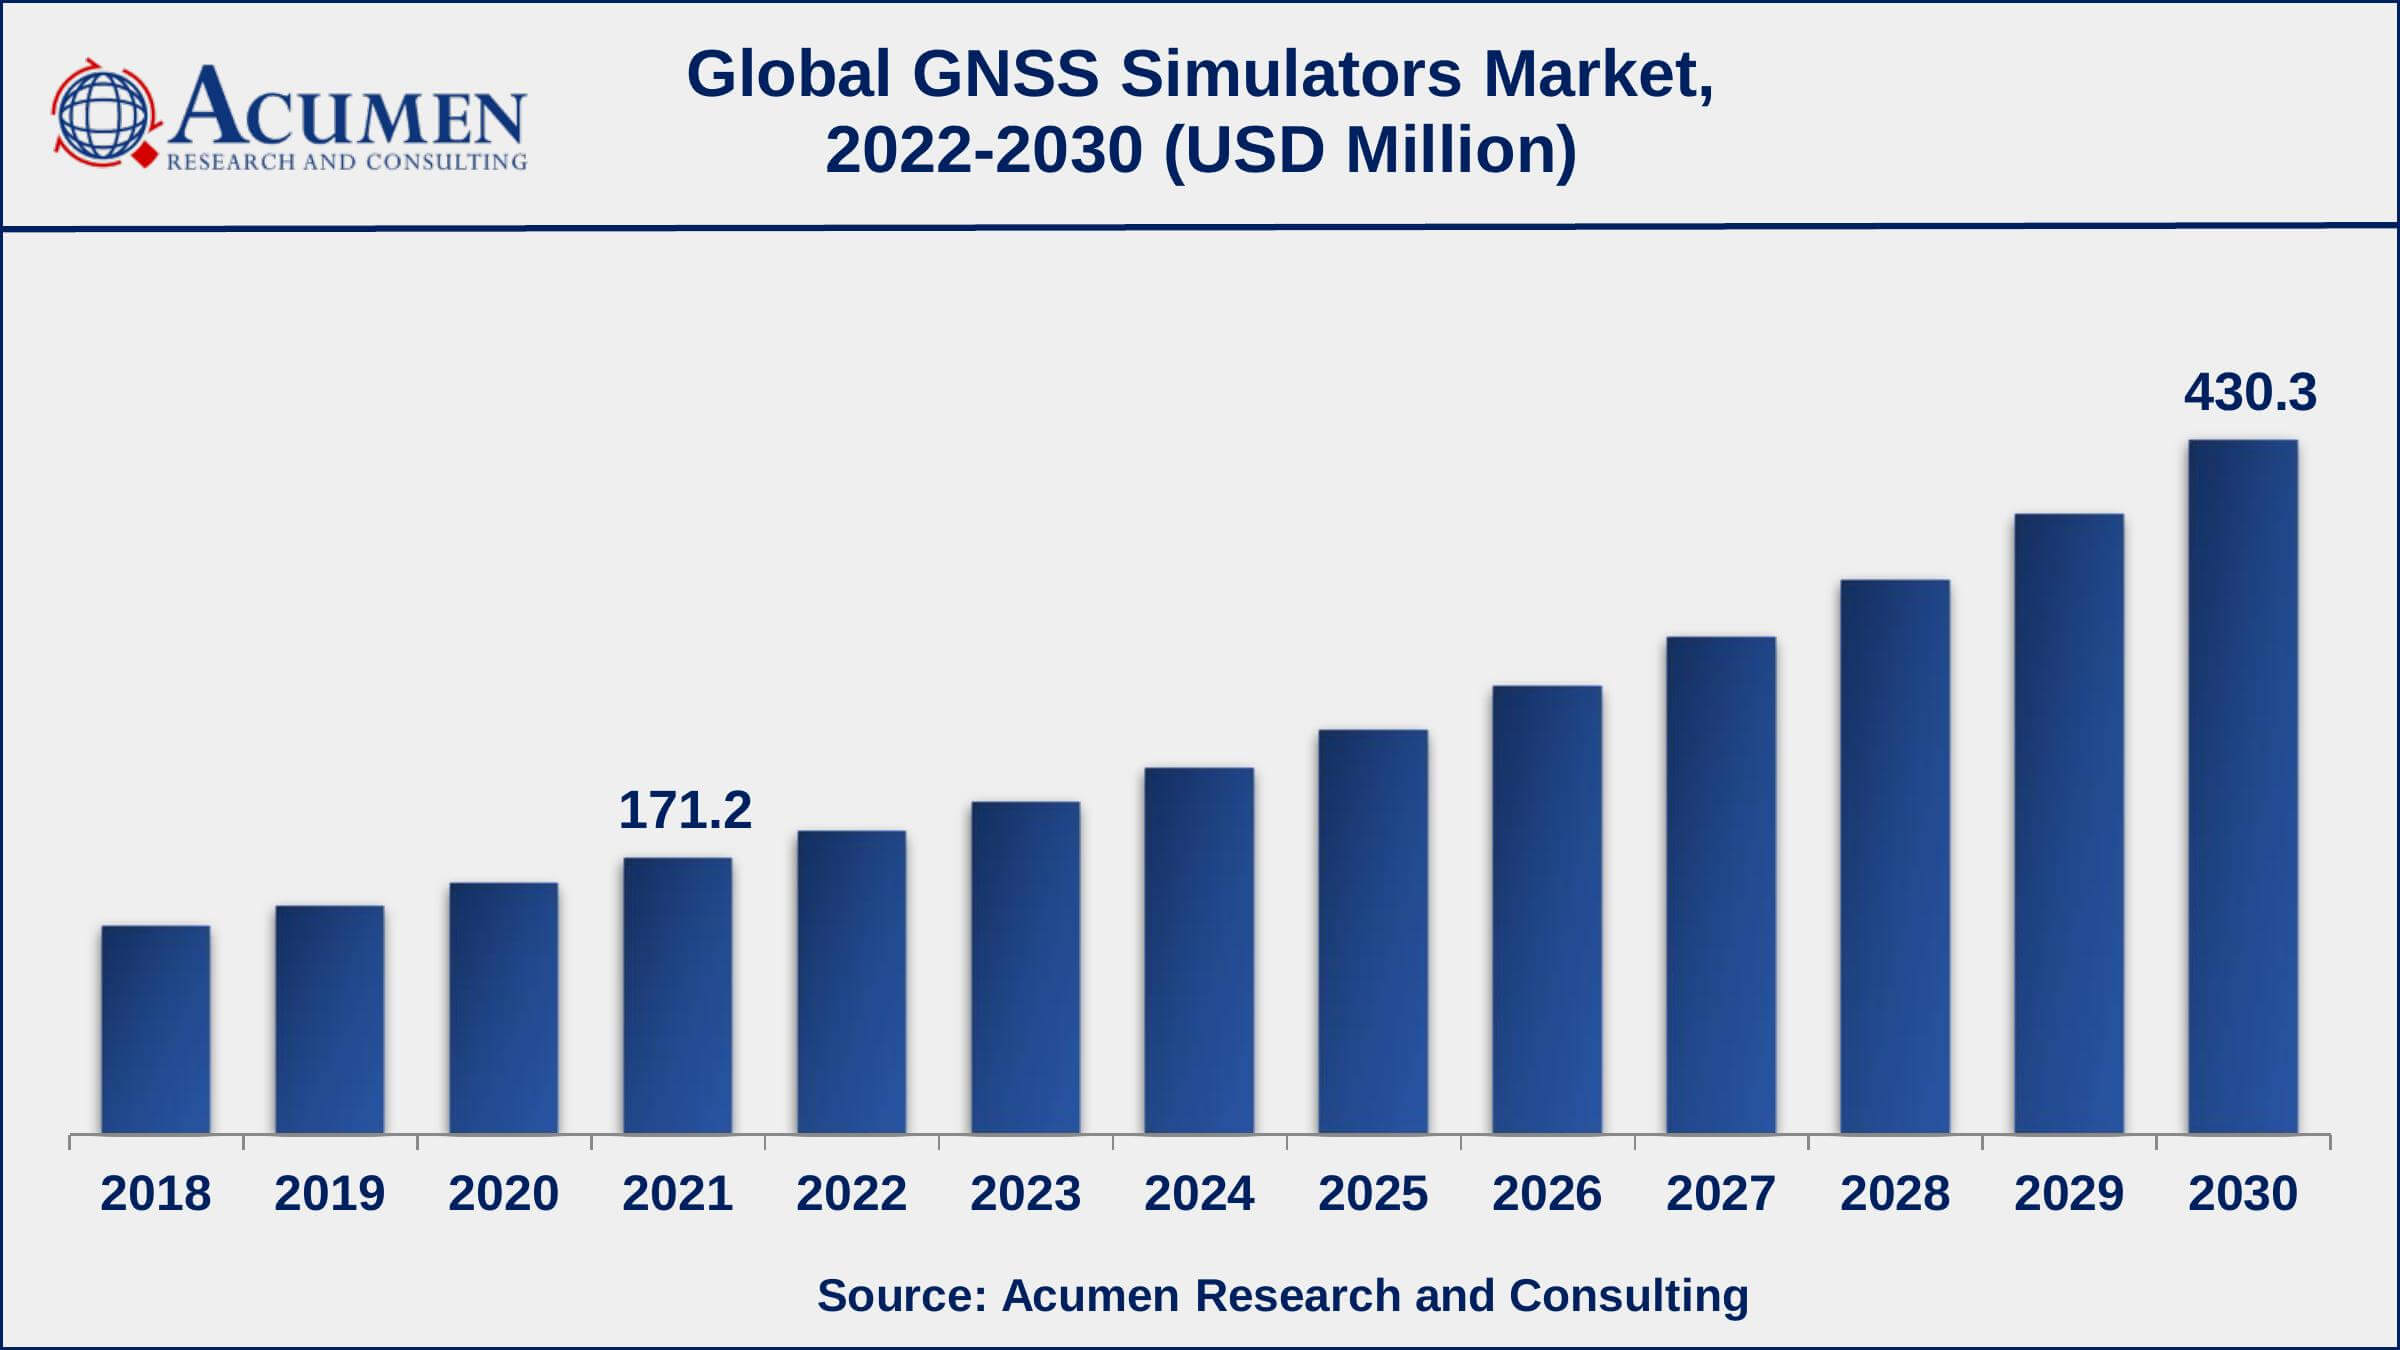 Asia-Pacific GNSS simulators market growth will record a CAGR of more than 11% from 2022 to 2030